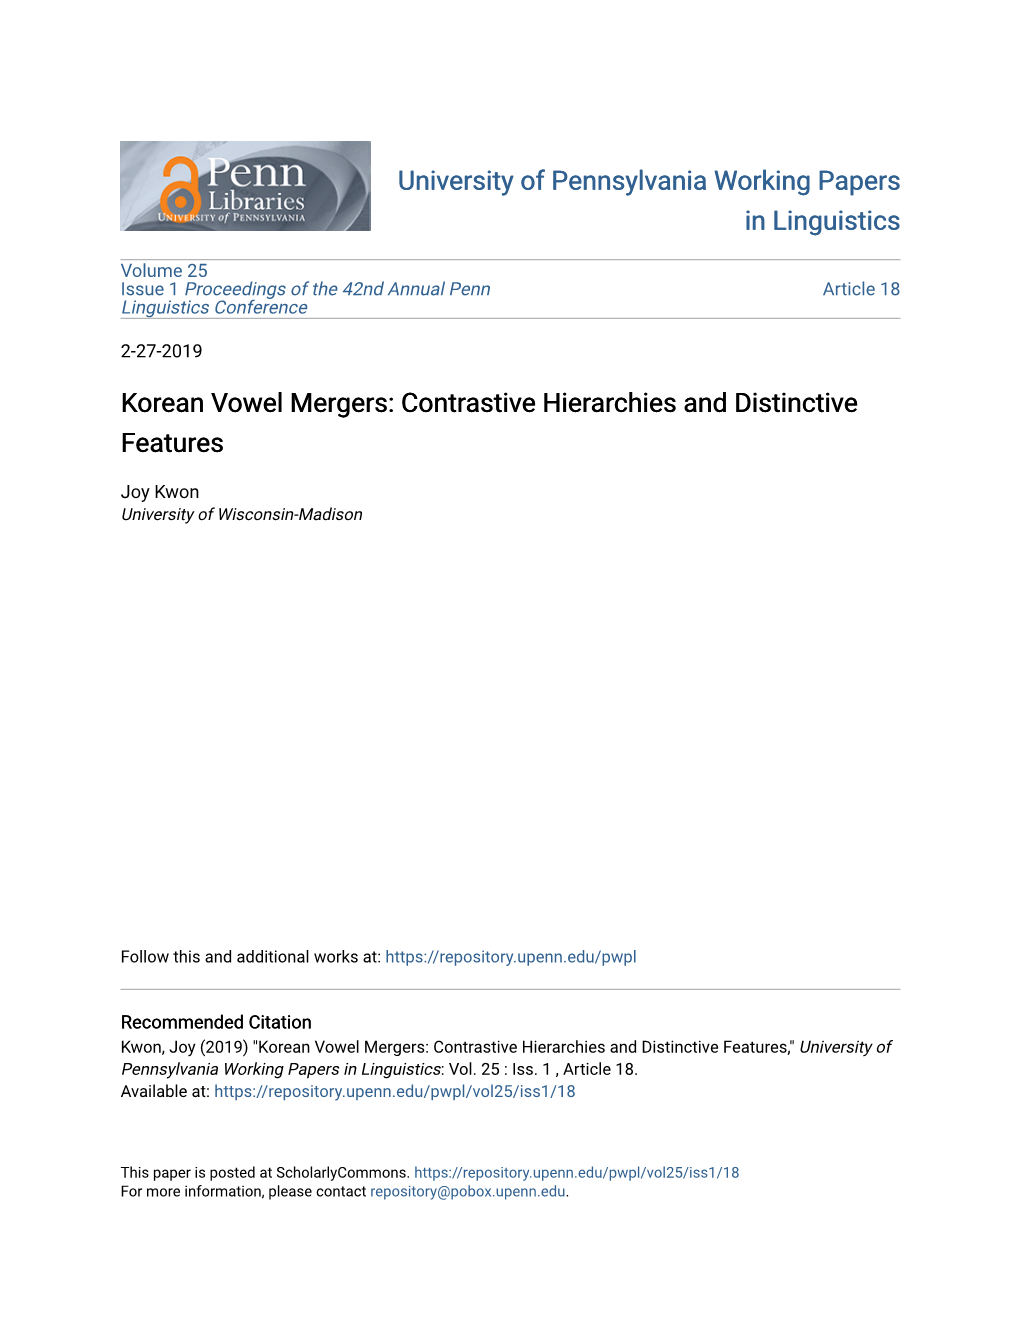 Korean Vowel Mergers: Contrastive Hierarchies and Distinctive Features